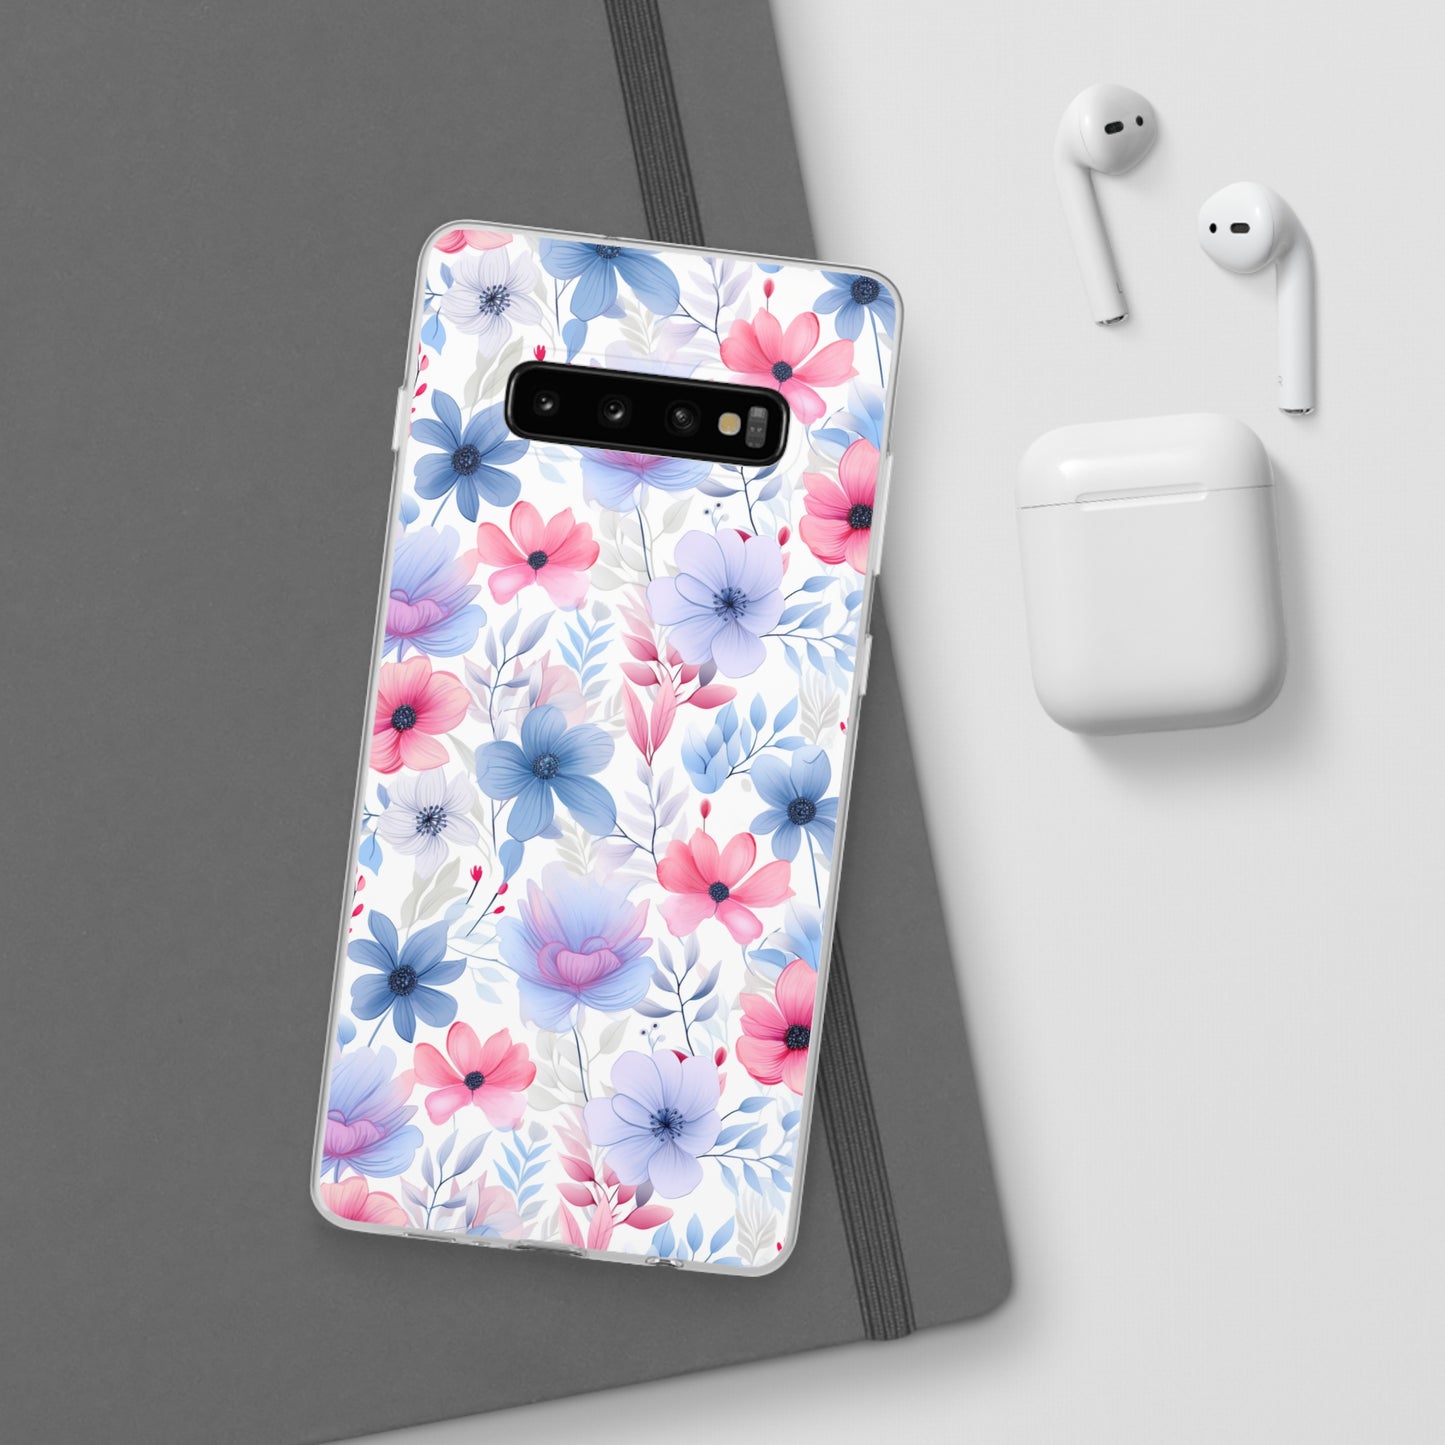 Floral Whispers - Soft Hues of Violets, Pinks, and Blues - Flexi Phone Case Phone Case Pattern Symphony Samsung Galaxy S10 Plus  